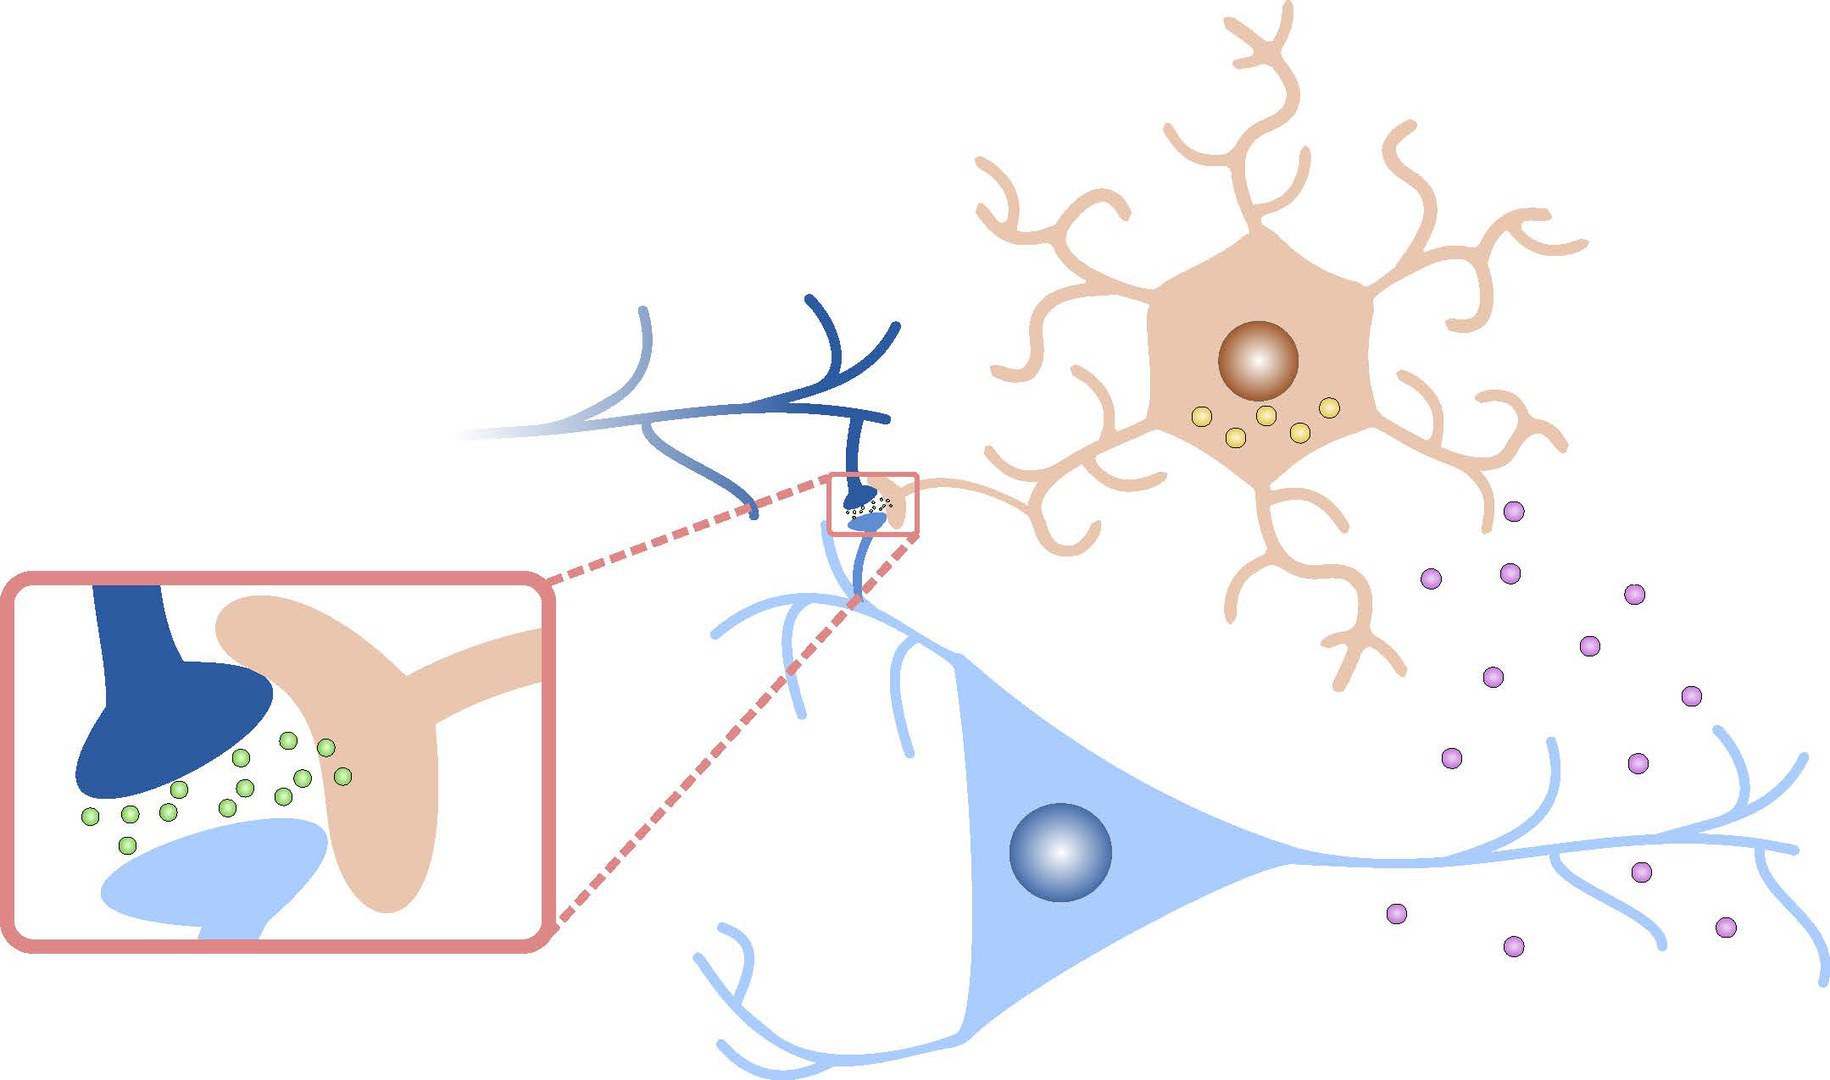 The model adds a third player, the astrocyte, - to the communication between two neurons. Endocannabinoids from the postsynaptic neuron bind to astrocyte receptors and alter the D-serine concentration, which controls the sensitivity of the synapse.